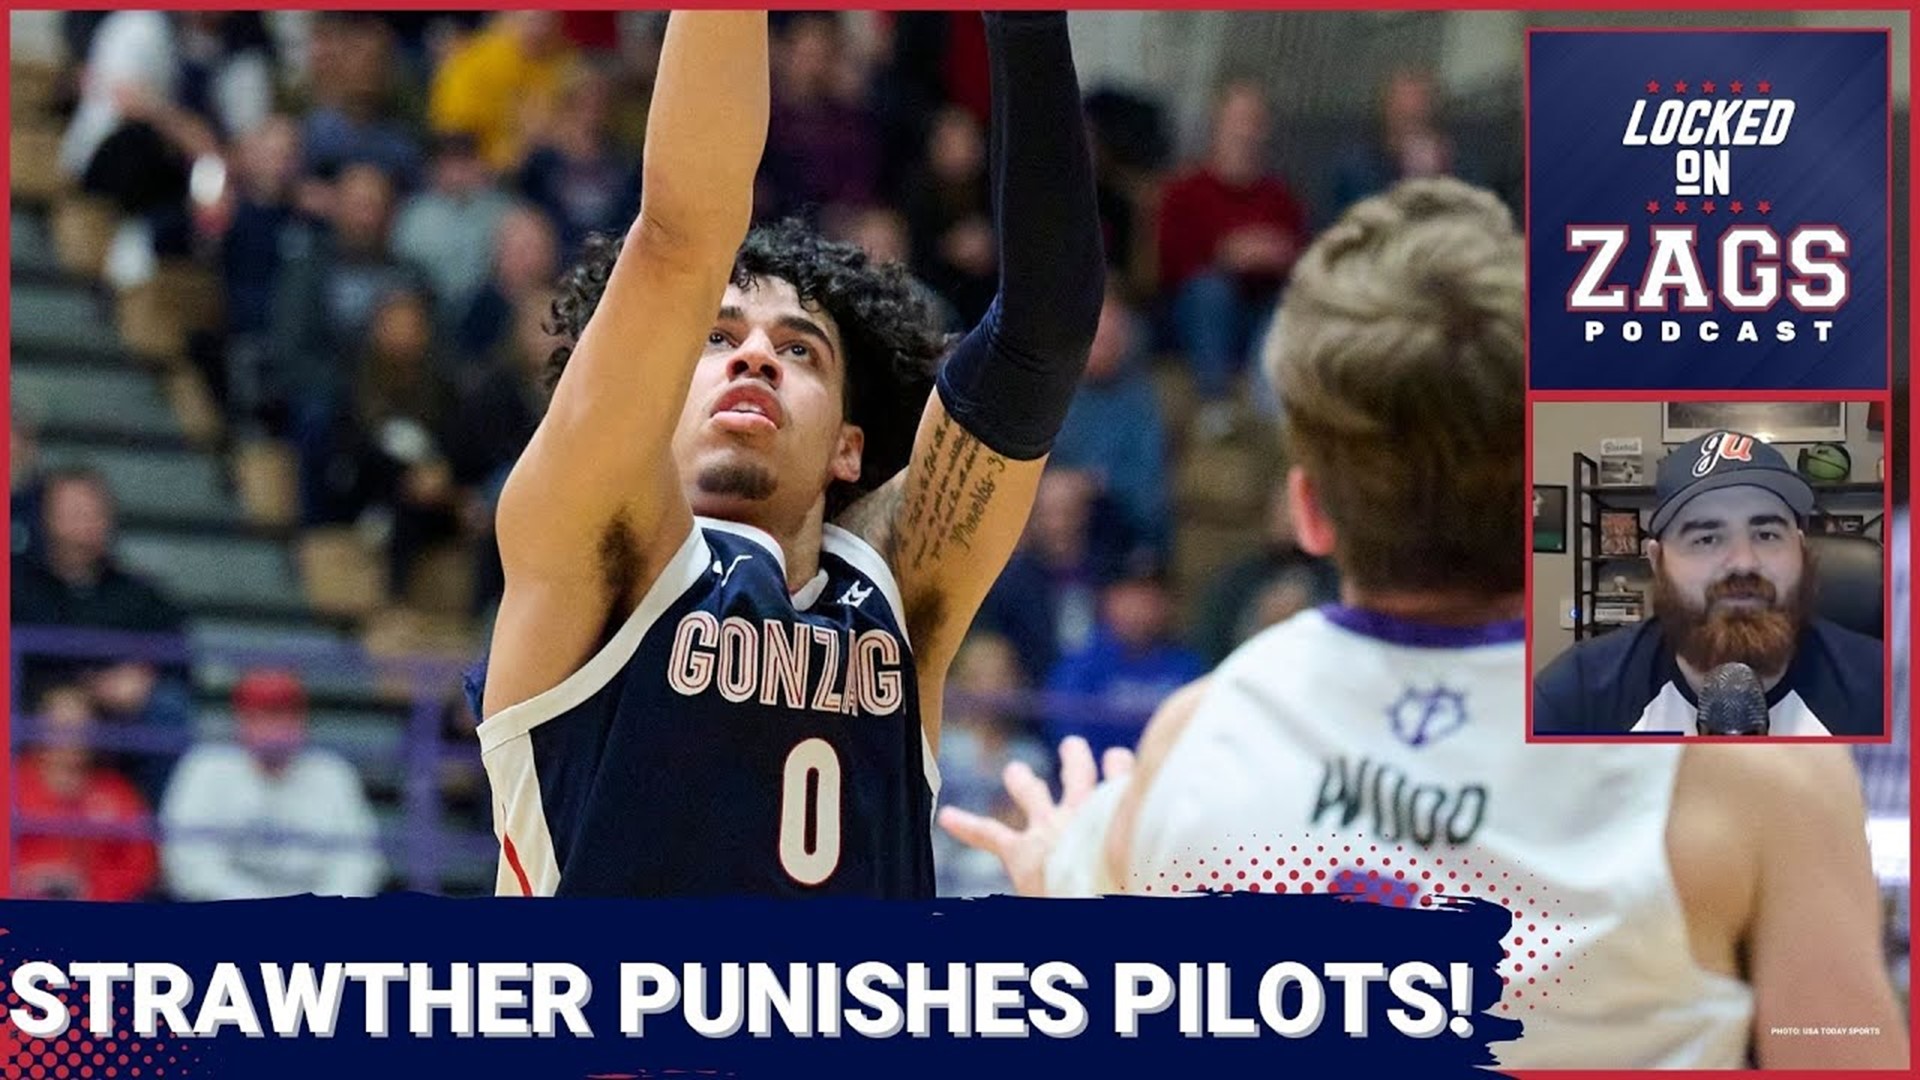 The Gonzaga Bulldogs downed the Portland Pilots on Saturday behind a career-high 40 points from Julian Strawther, knocking down eight three-pointers in the process.